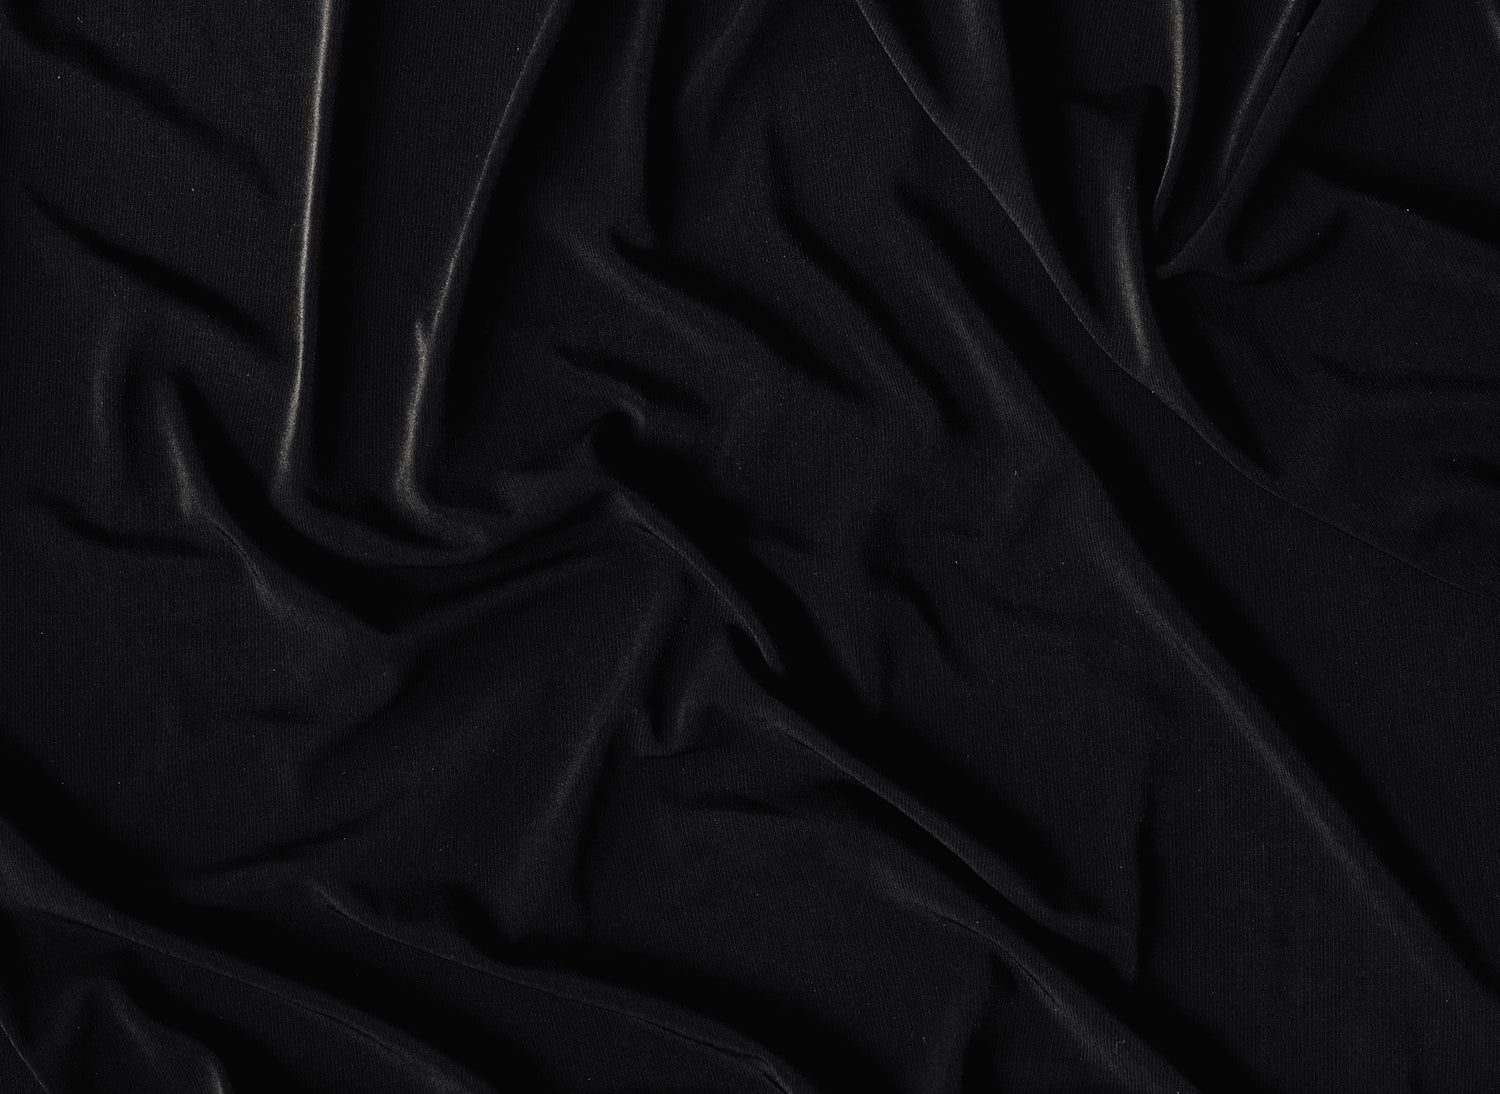 scrunched up black spandex fabric